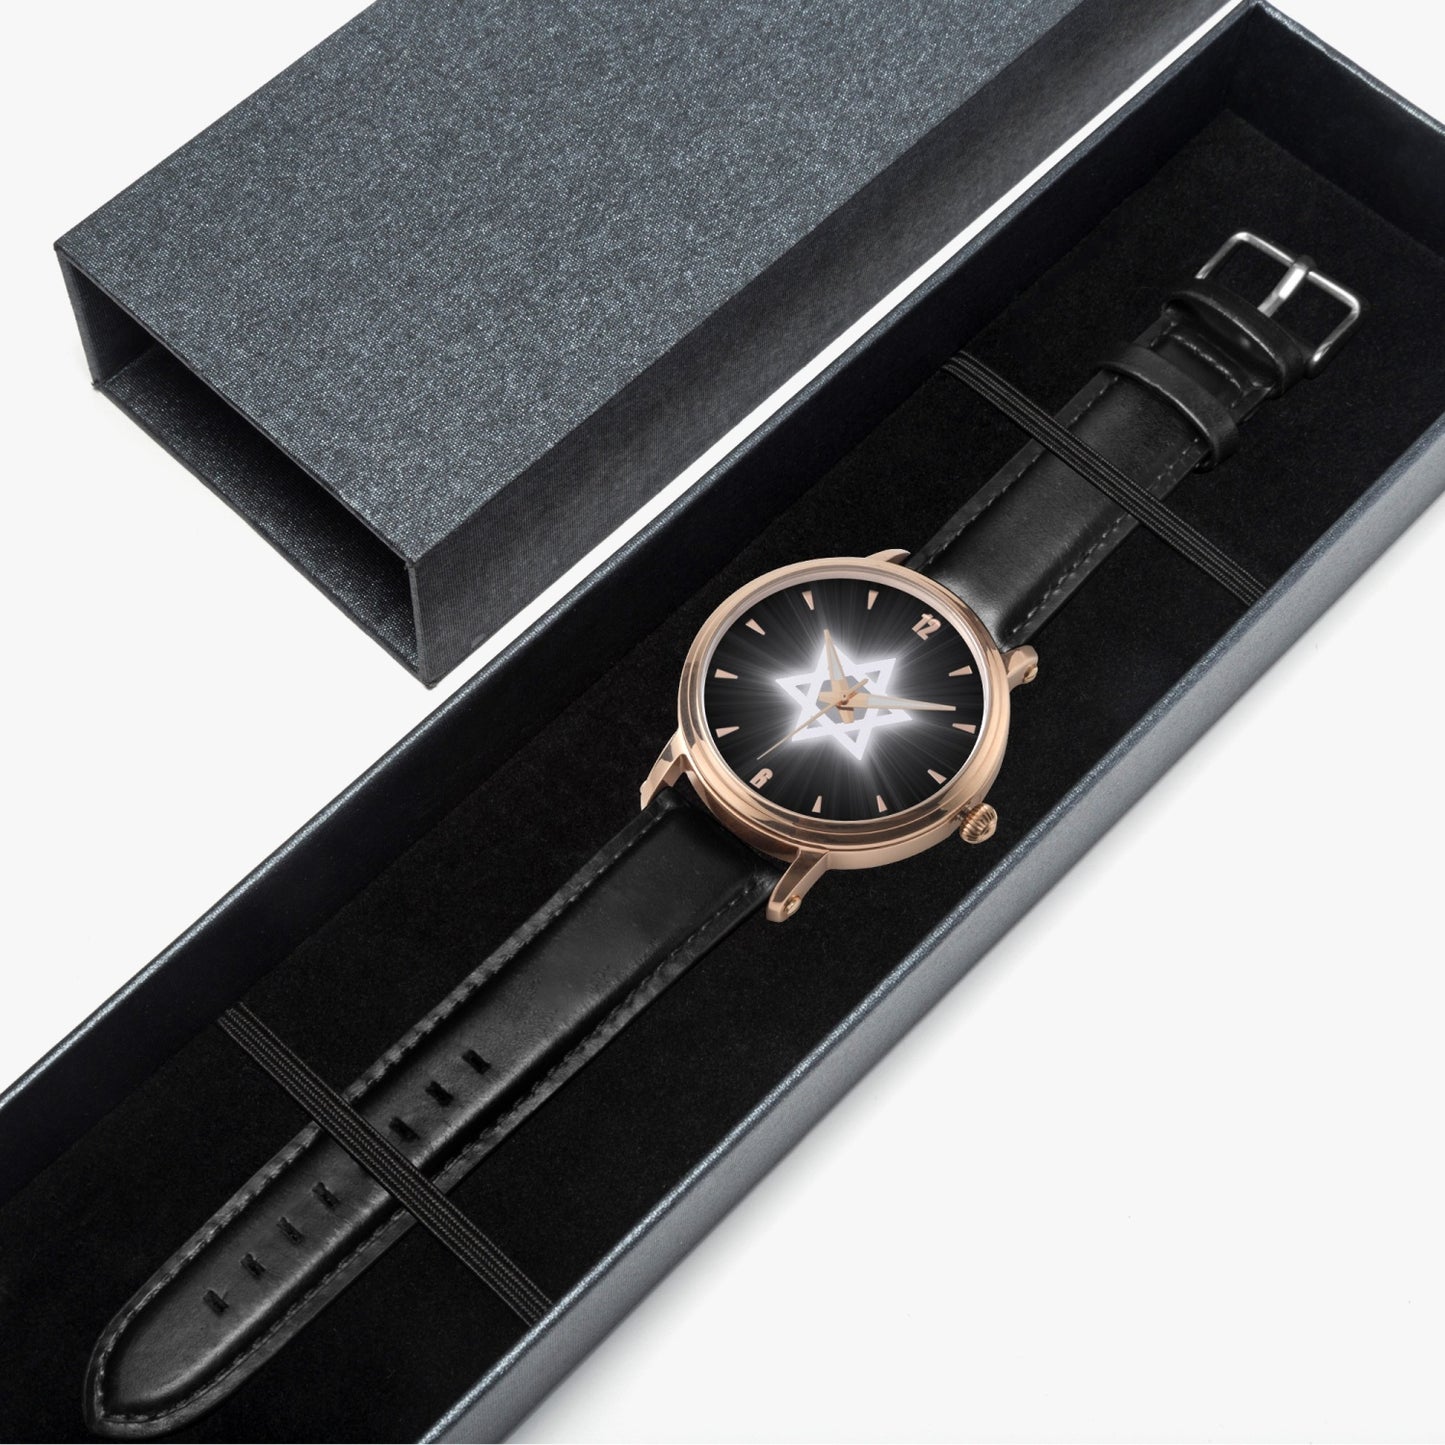 Bright White Star of David Israeli Watch with a case